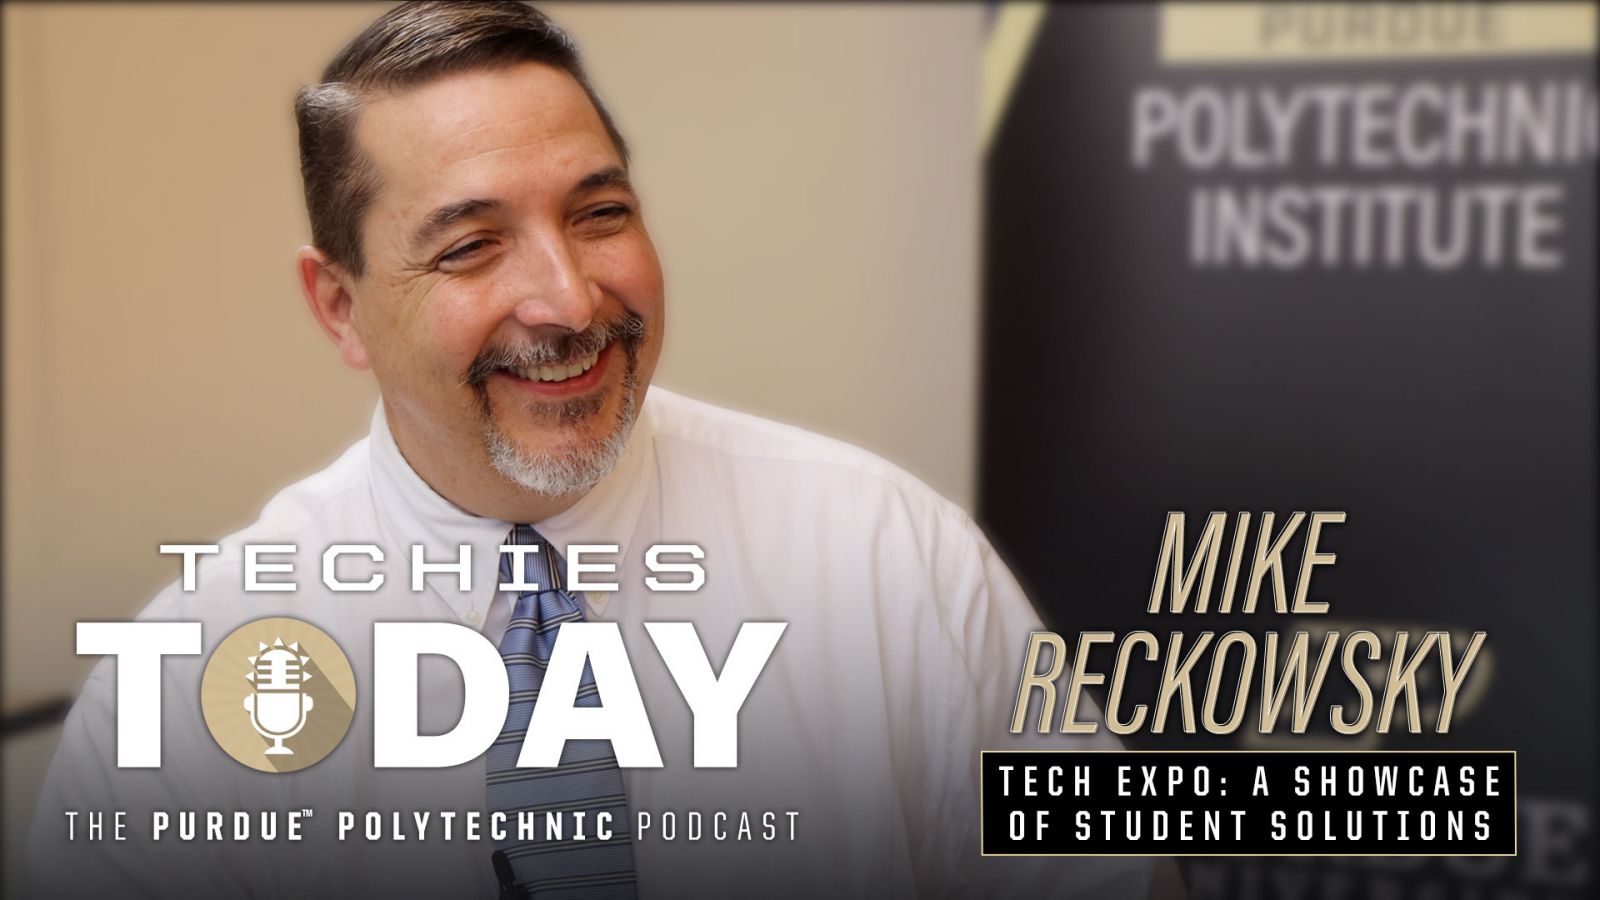 Mike Reckowsky & Tech Expo, a Showcase of Student Solutions, on Techies Today, the Purdue Polytechnic Podcast